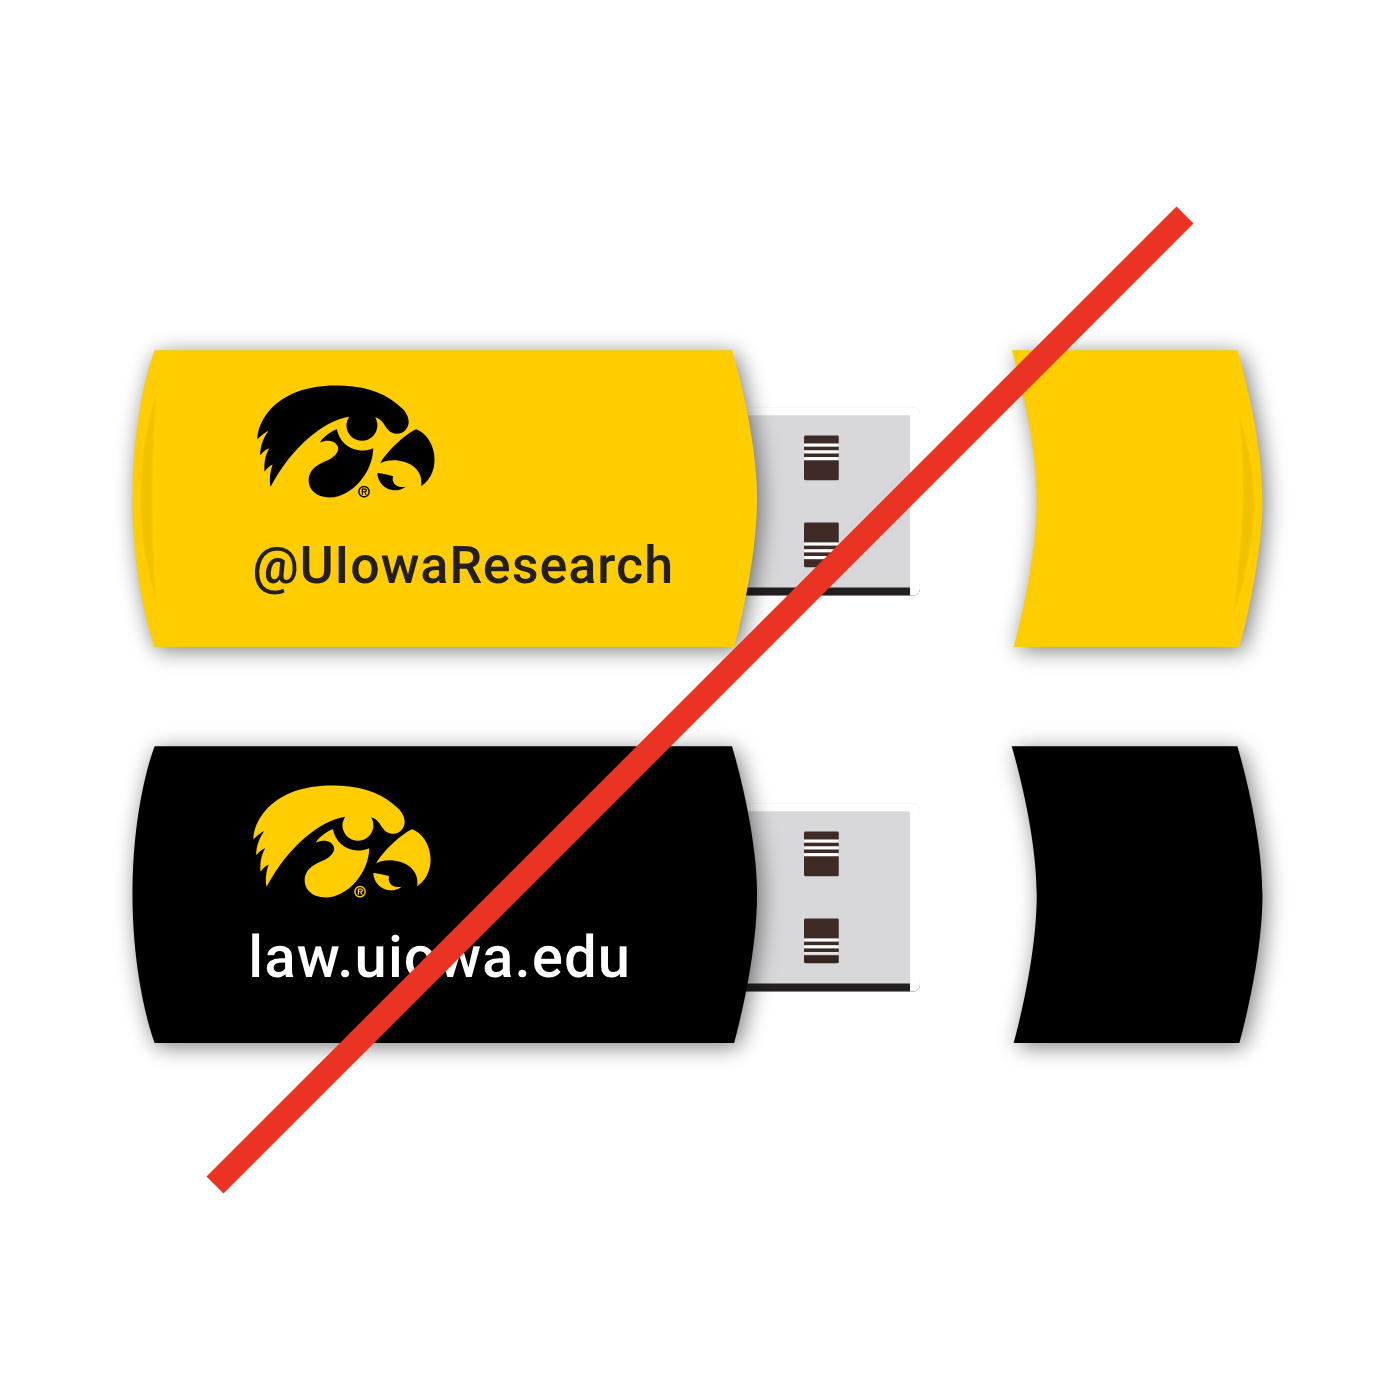 Prohibited example of the Tigerhawk used in place of the block IOWA on a USB drive